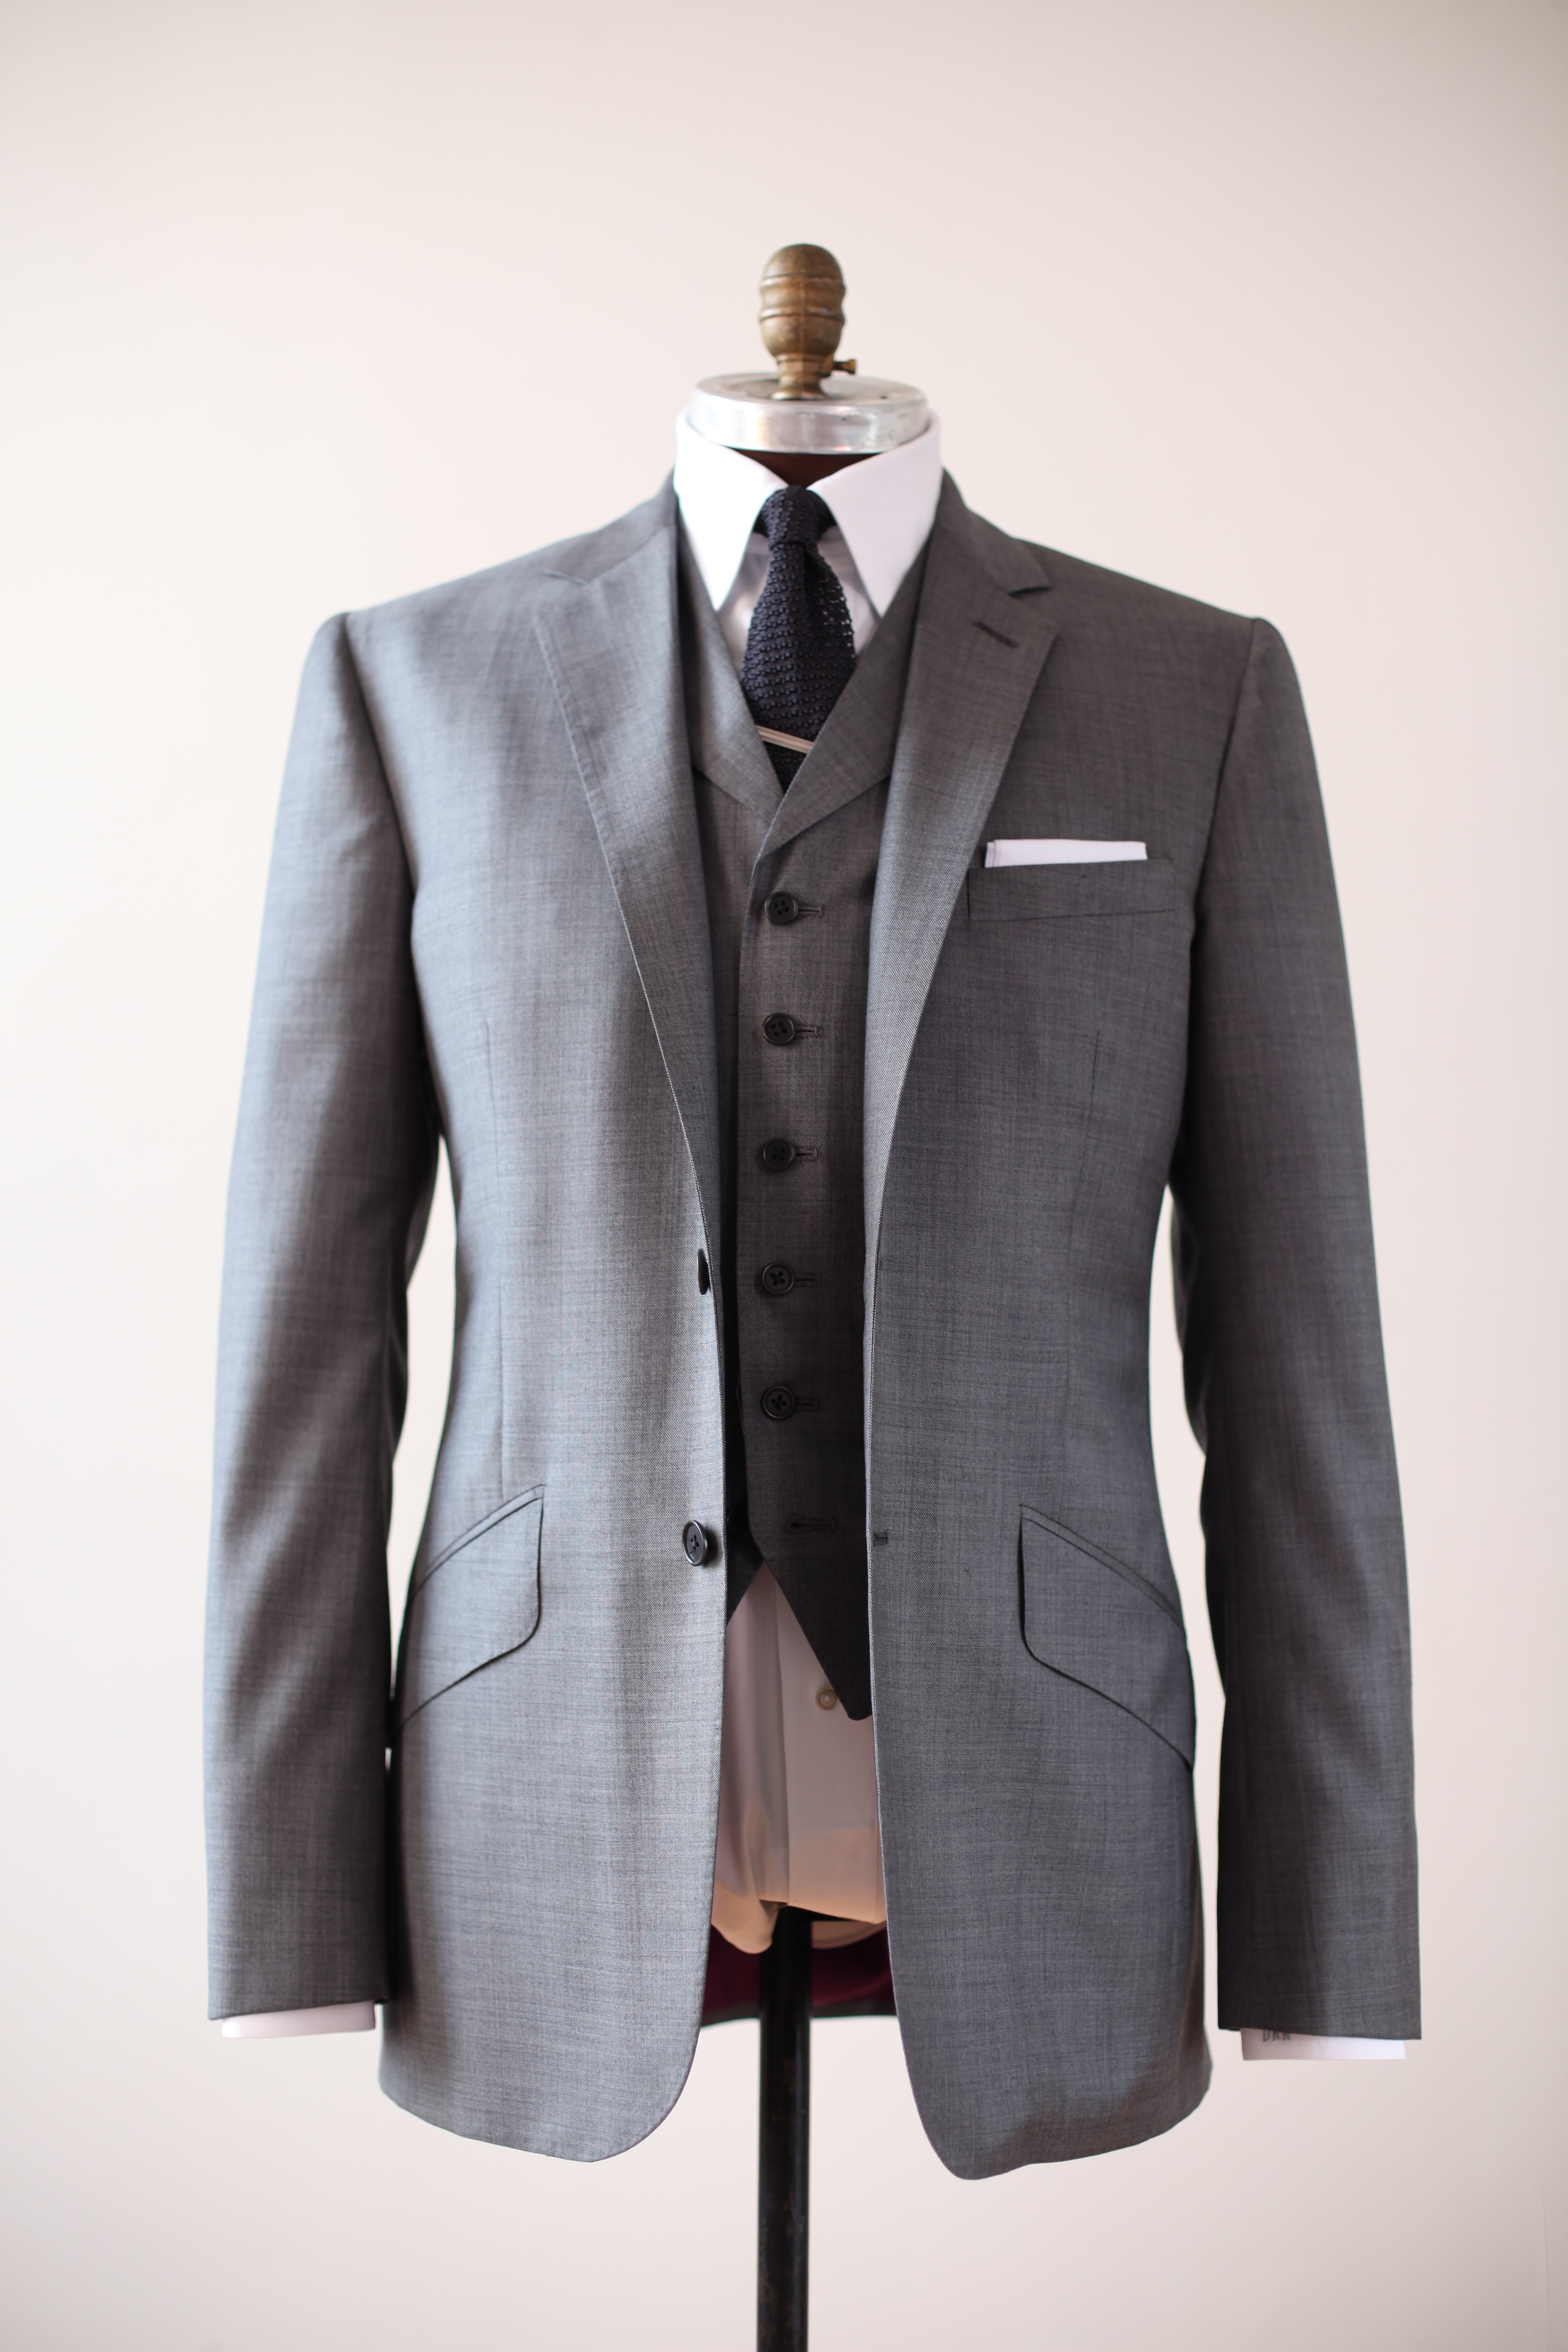 a reeves bespoke suit starts at $4000 with a 50% deposit to start and COMHXNT